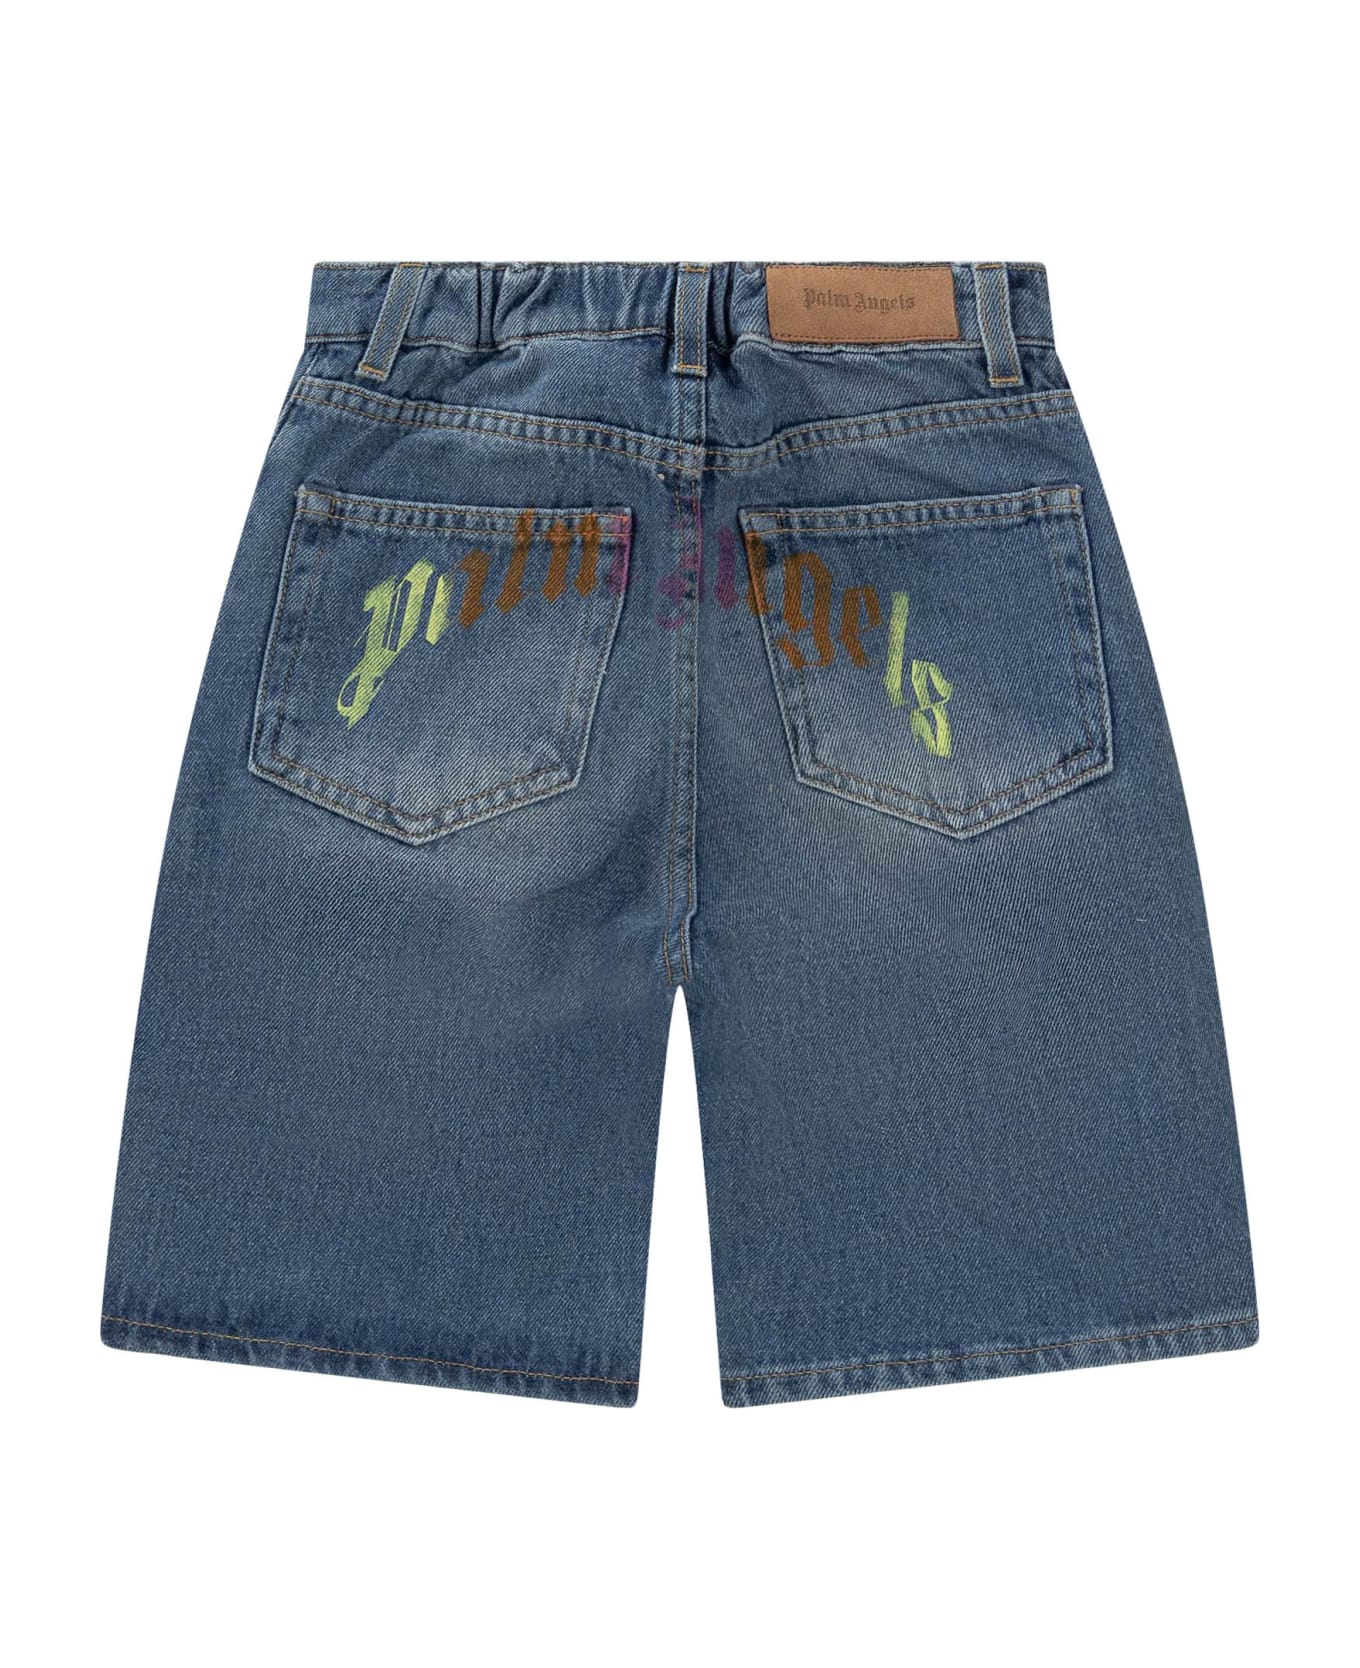 Palm Angels Med Shorts With Logo - BLUE MULTI ボトムス